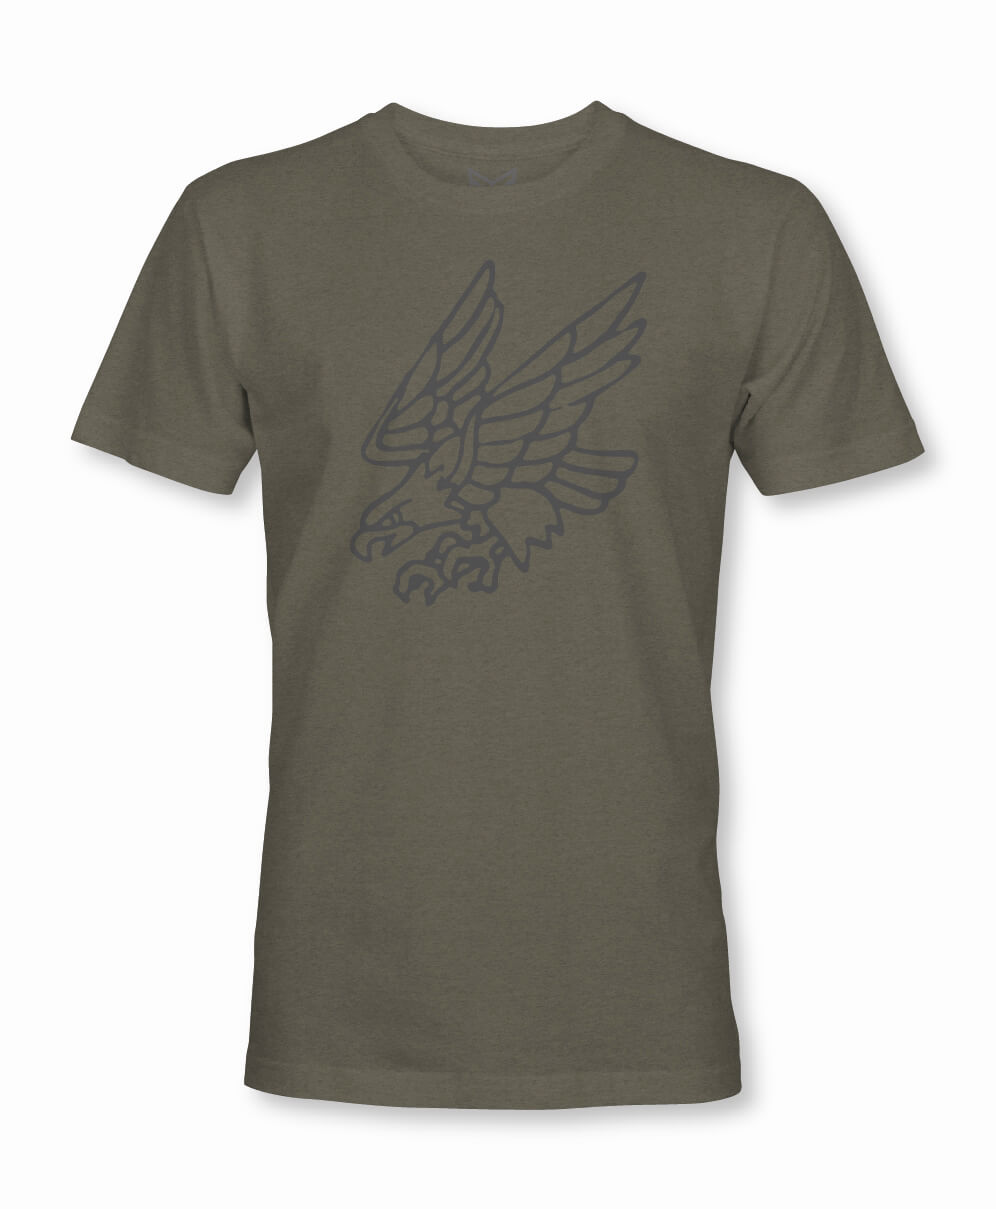 GET AFTER IT TEE - HEATHER MILITARY GREEN